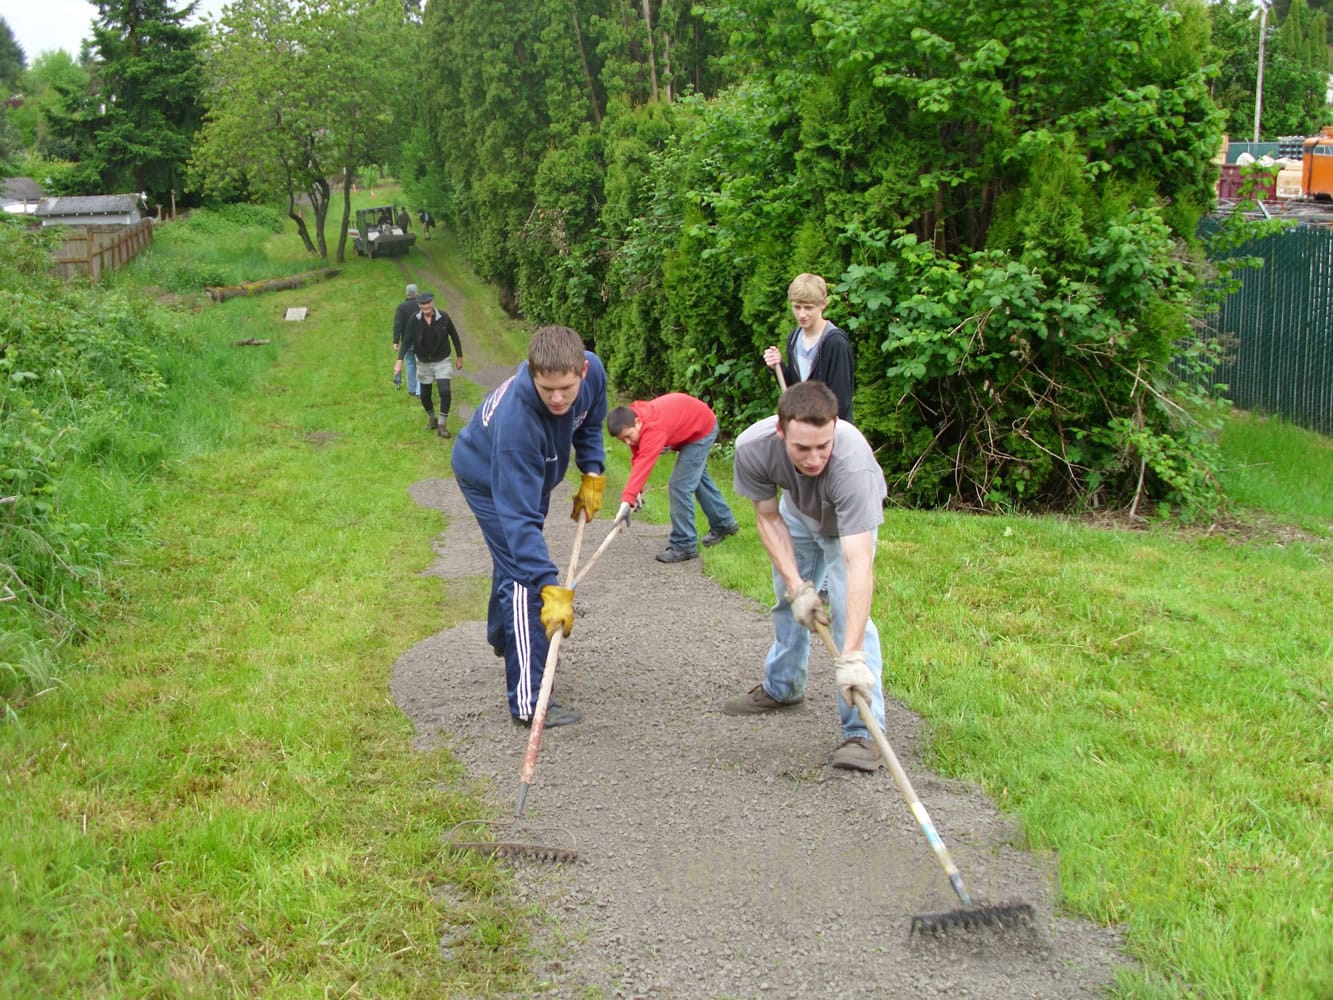 Members of Eagle Scout Troop 393, Josh Hauxhurst, from left, Andrew Park, David Zakand, Trevor Brown right front, spread gravel on the Ellen Davis Trail in late May.